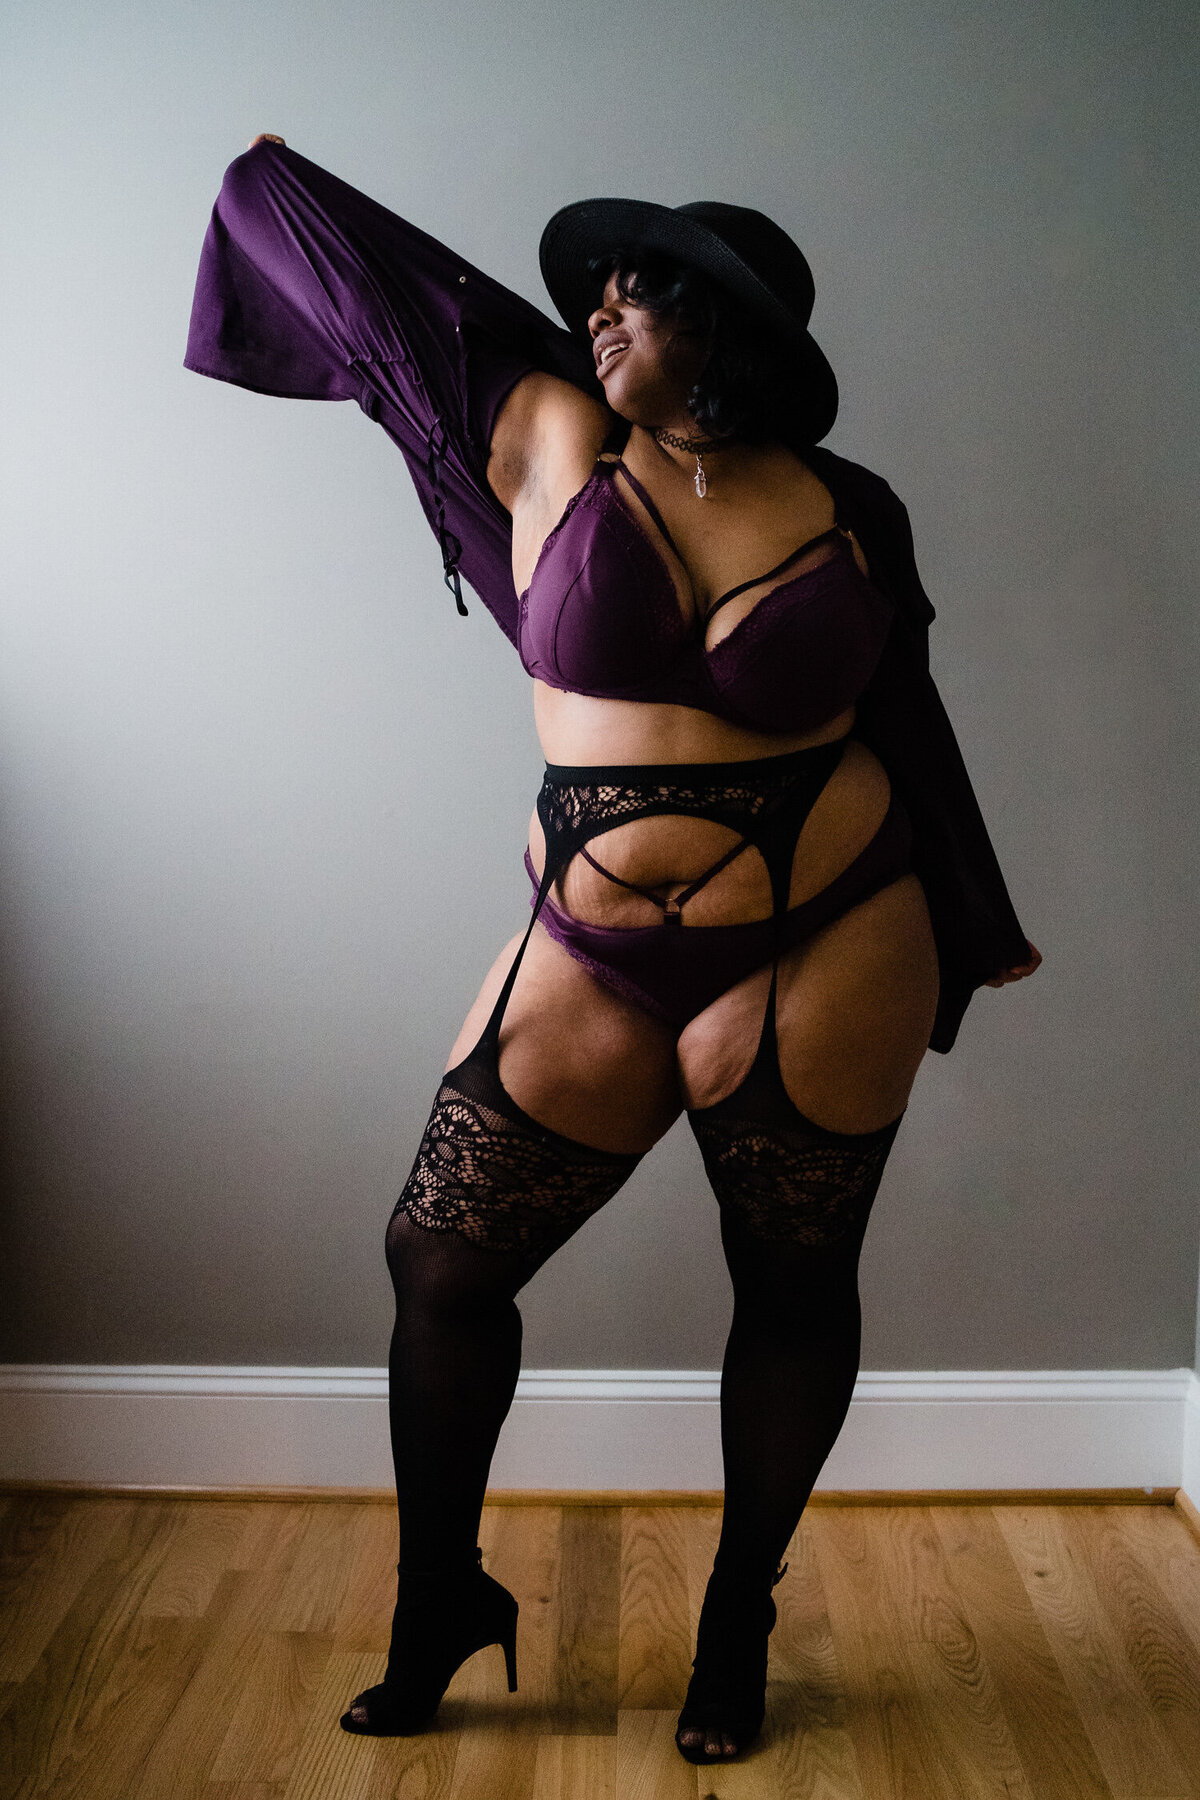 A person in lingerie with one arm outstretched.